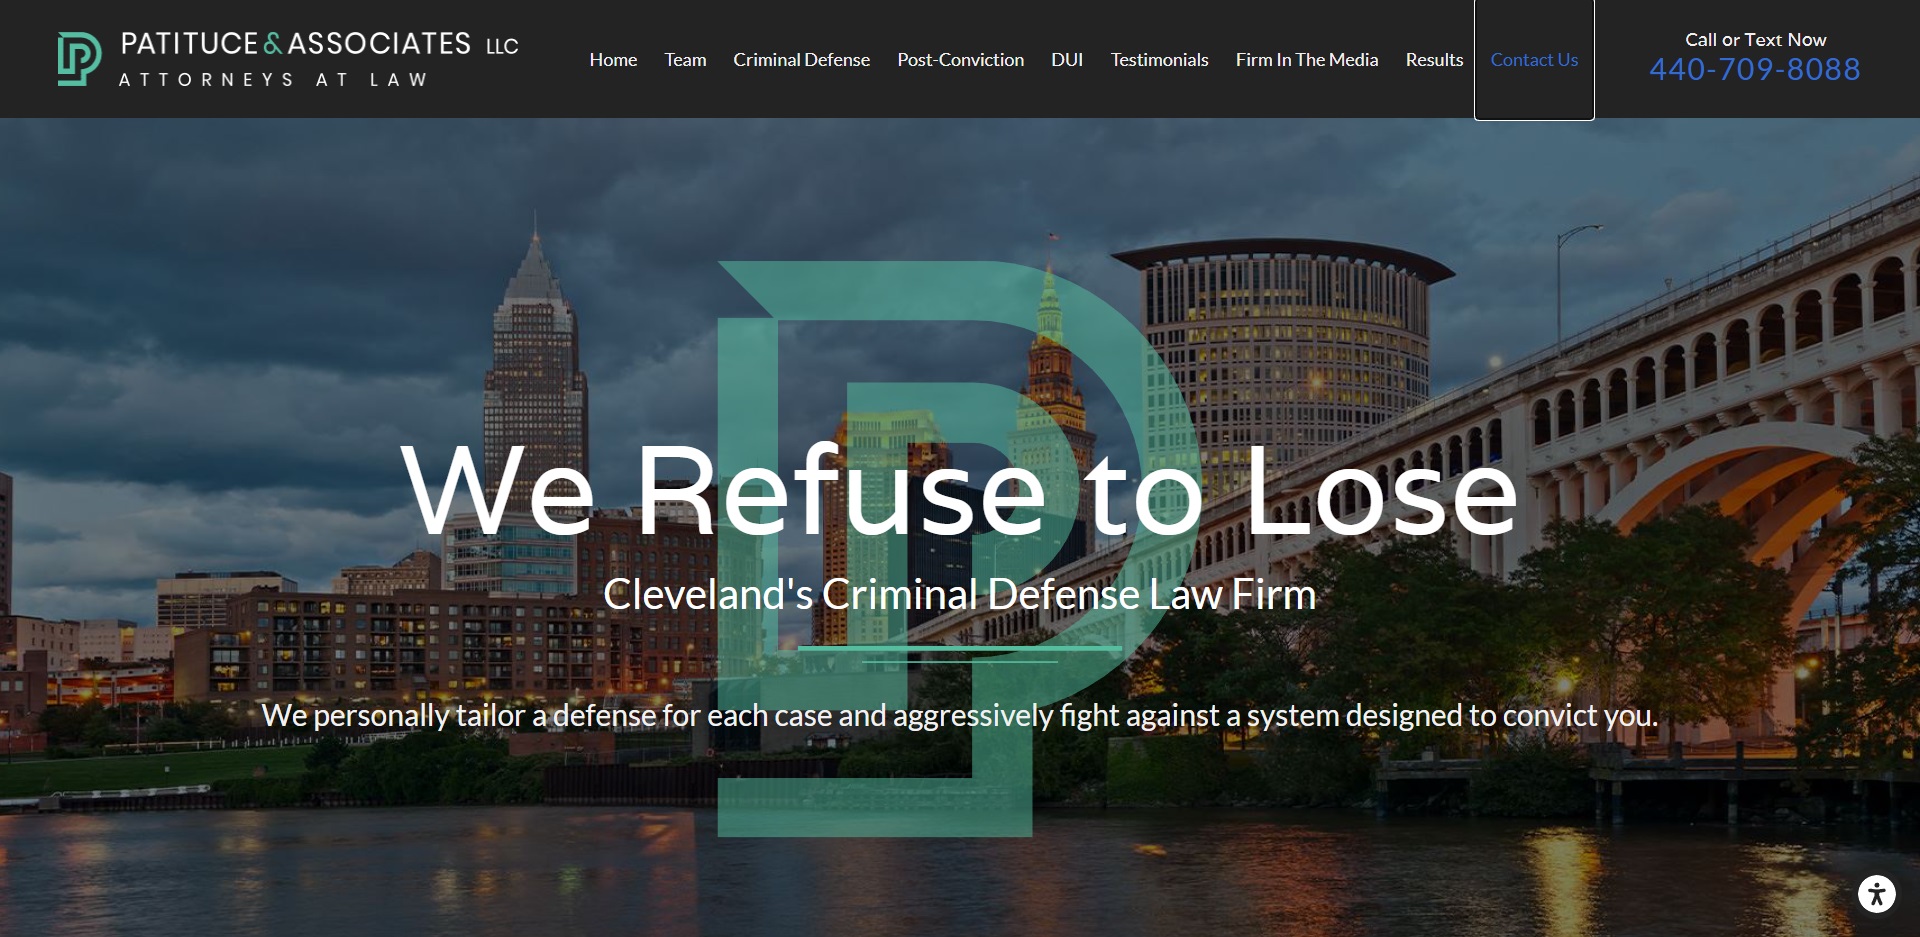 5 Best Drink Driving Attorneys in Cleveland, OH